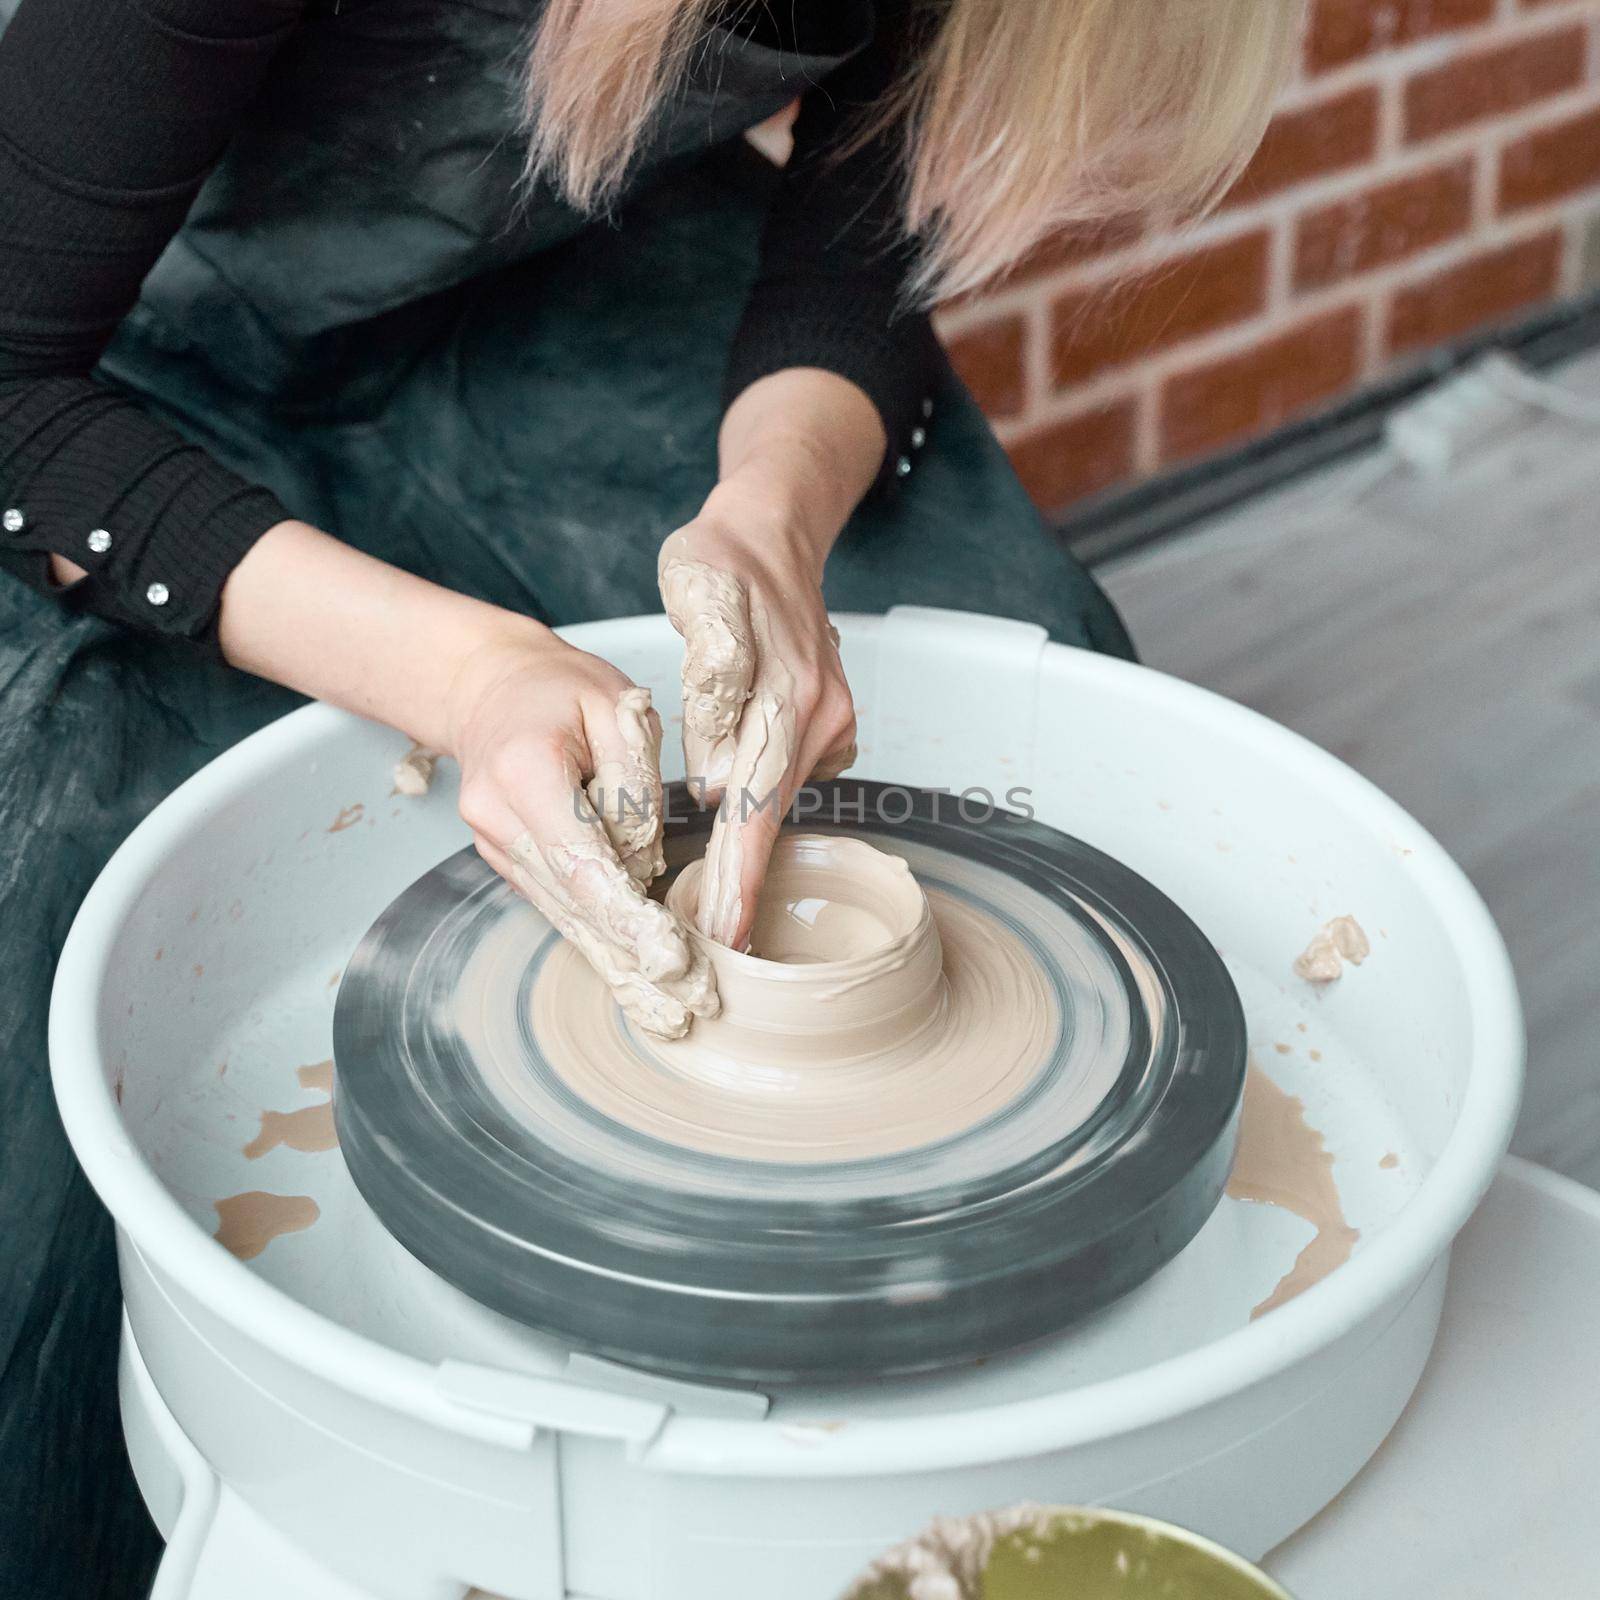 Woman making ceramic pottery on wheel, hands close-up, creation of ceramic ware. Handwork, craft, manual labor, buisness. Earn extra money, turning hobbies into cash and turning passion into a job